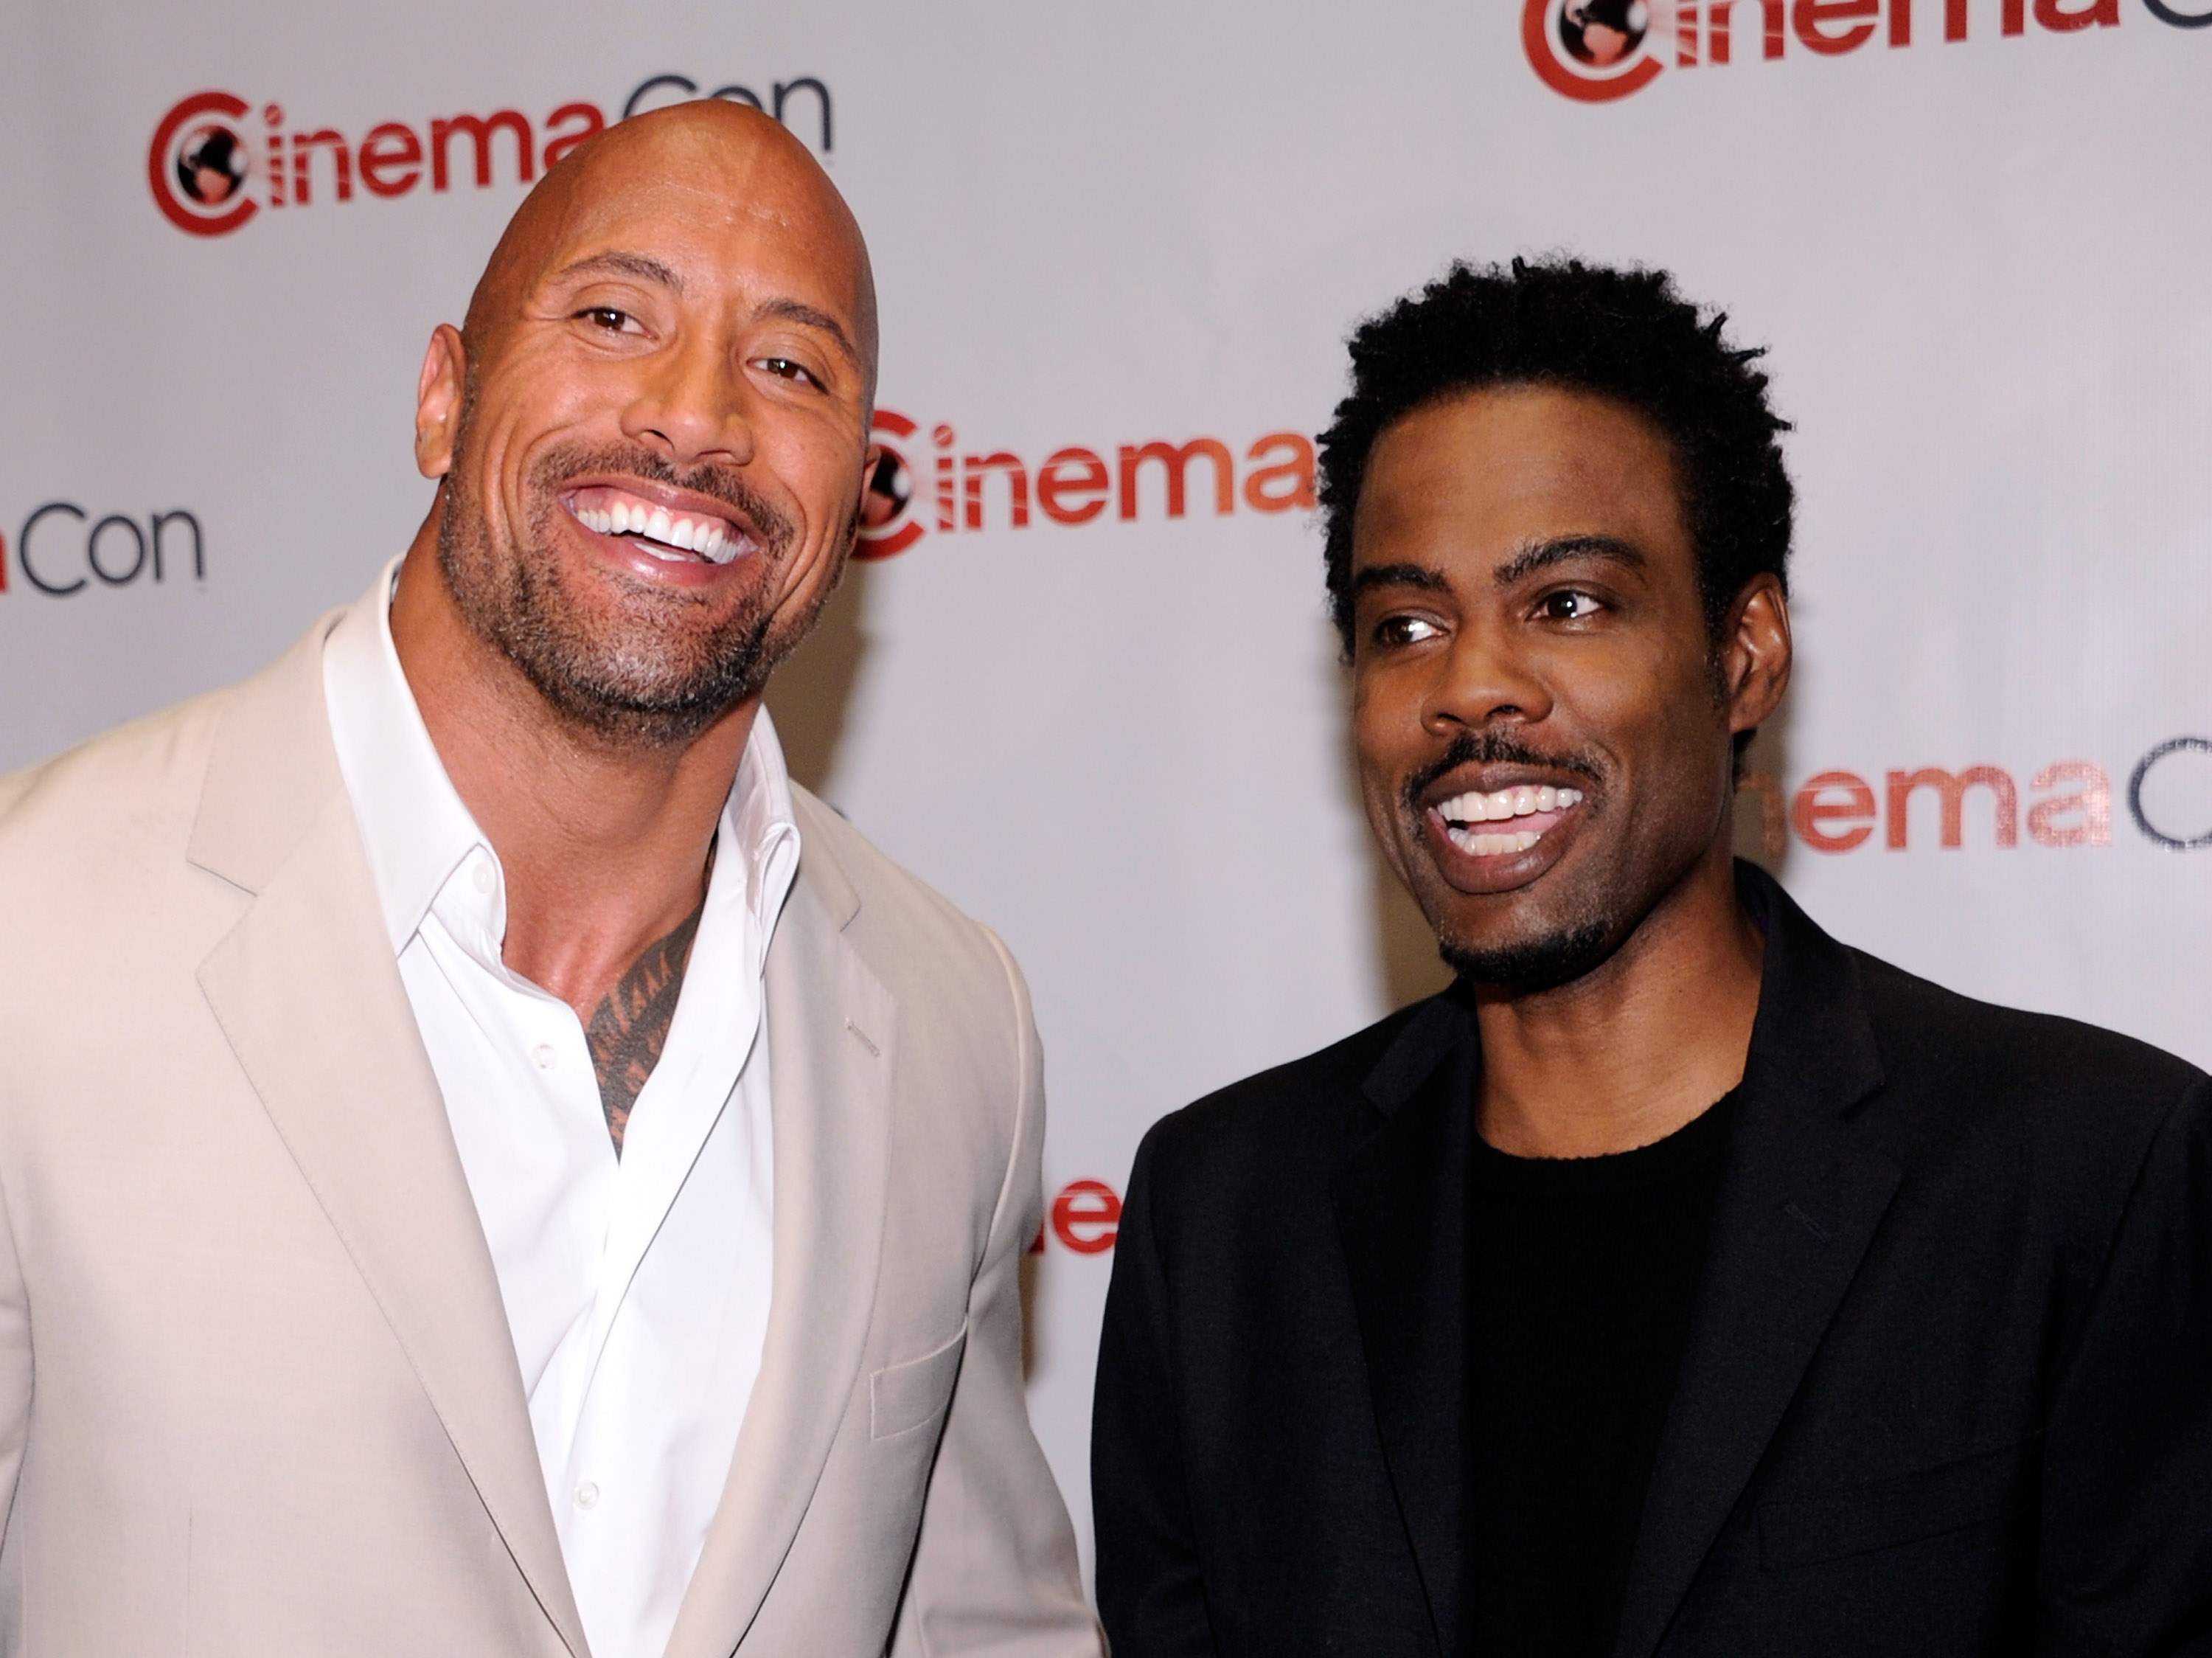 Chris Rock Jokes That He Now Begs Dwayne Johnson For Gigs After Rejecting Him